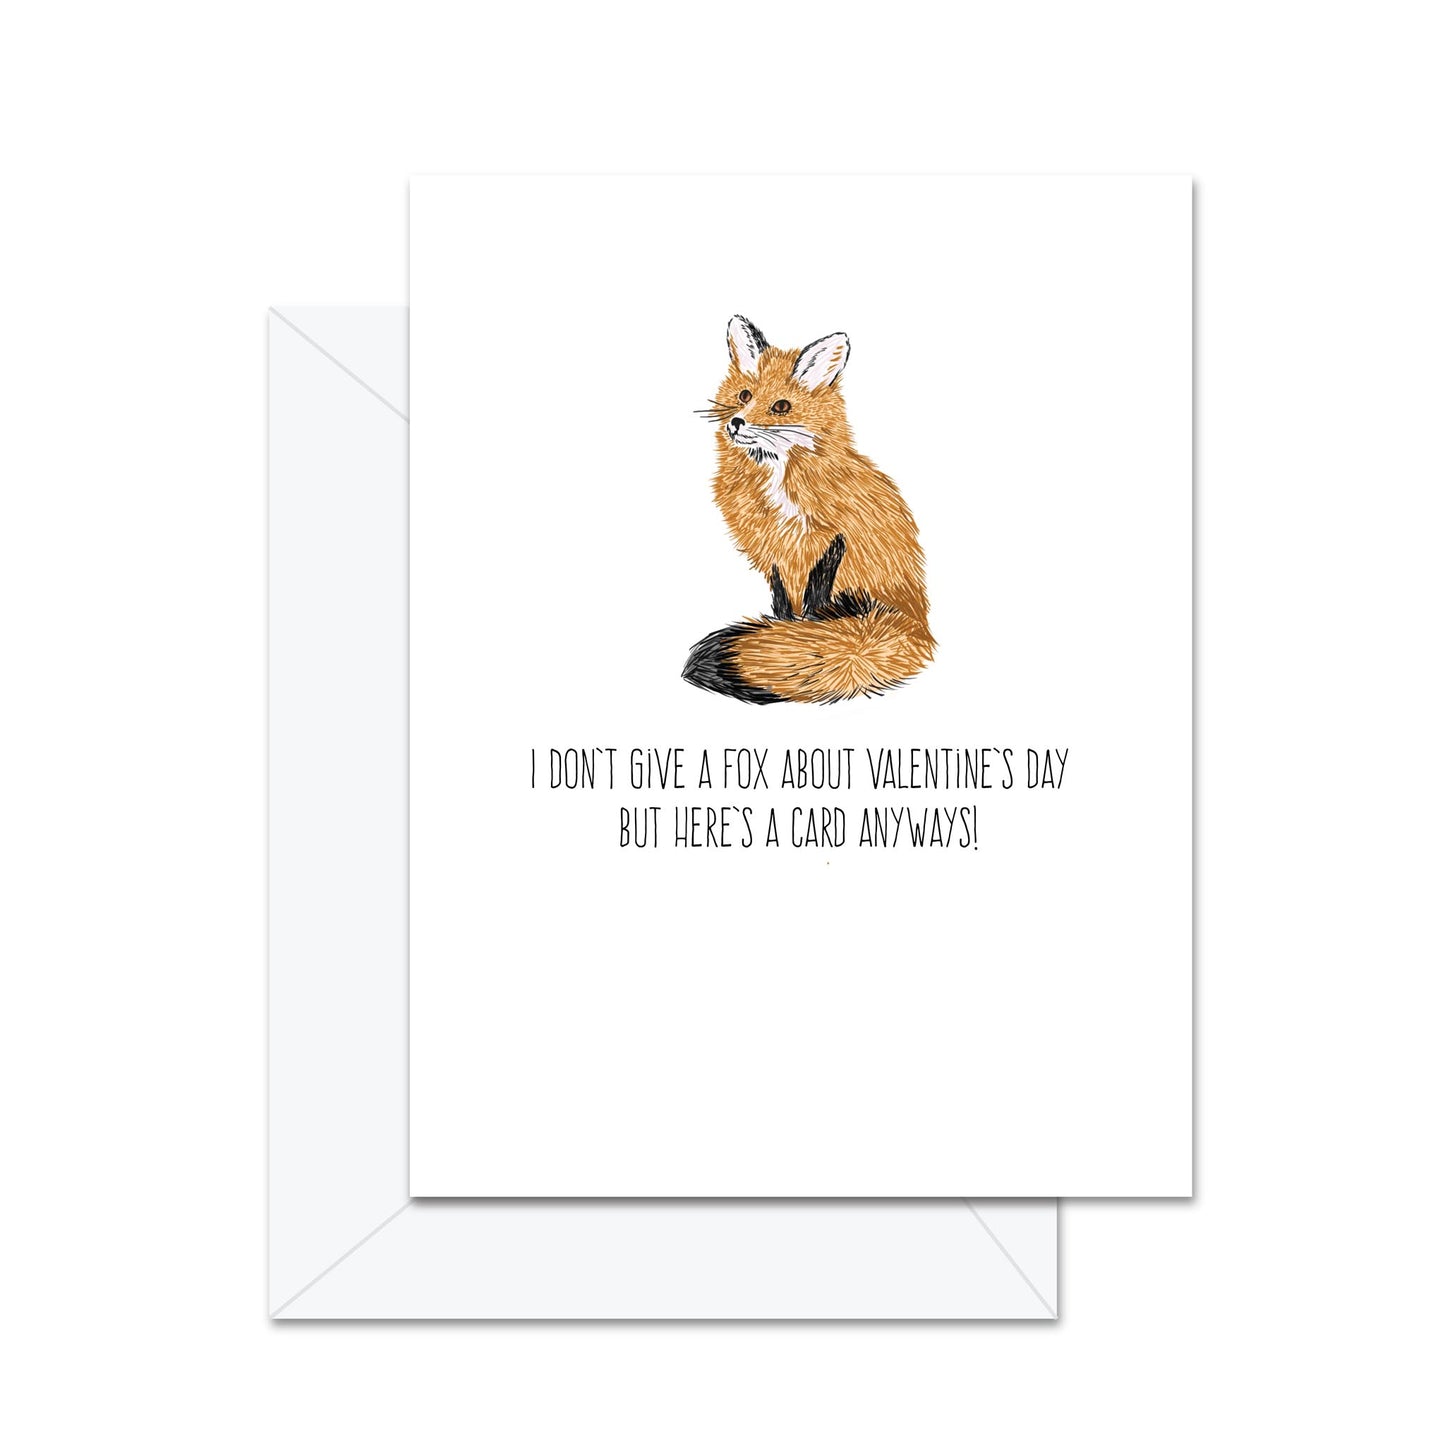 I Don't Give A Fox About Valentine's Day But Here Is A Card Anyways! - Greeting Card